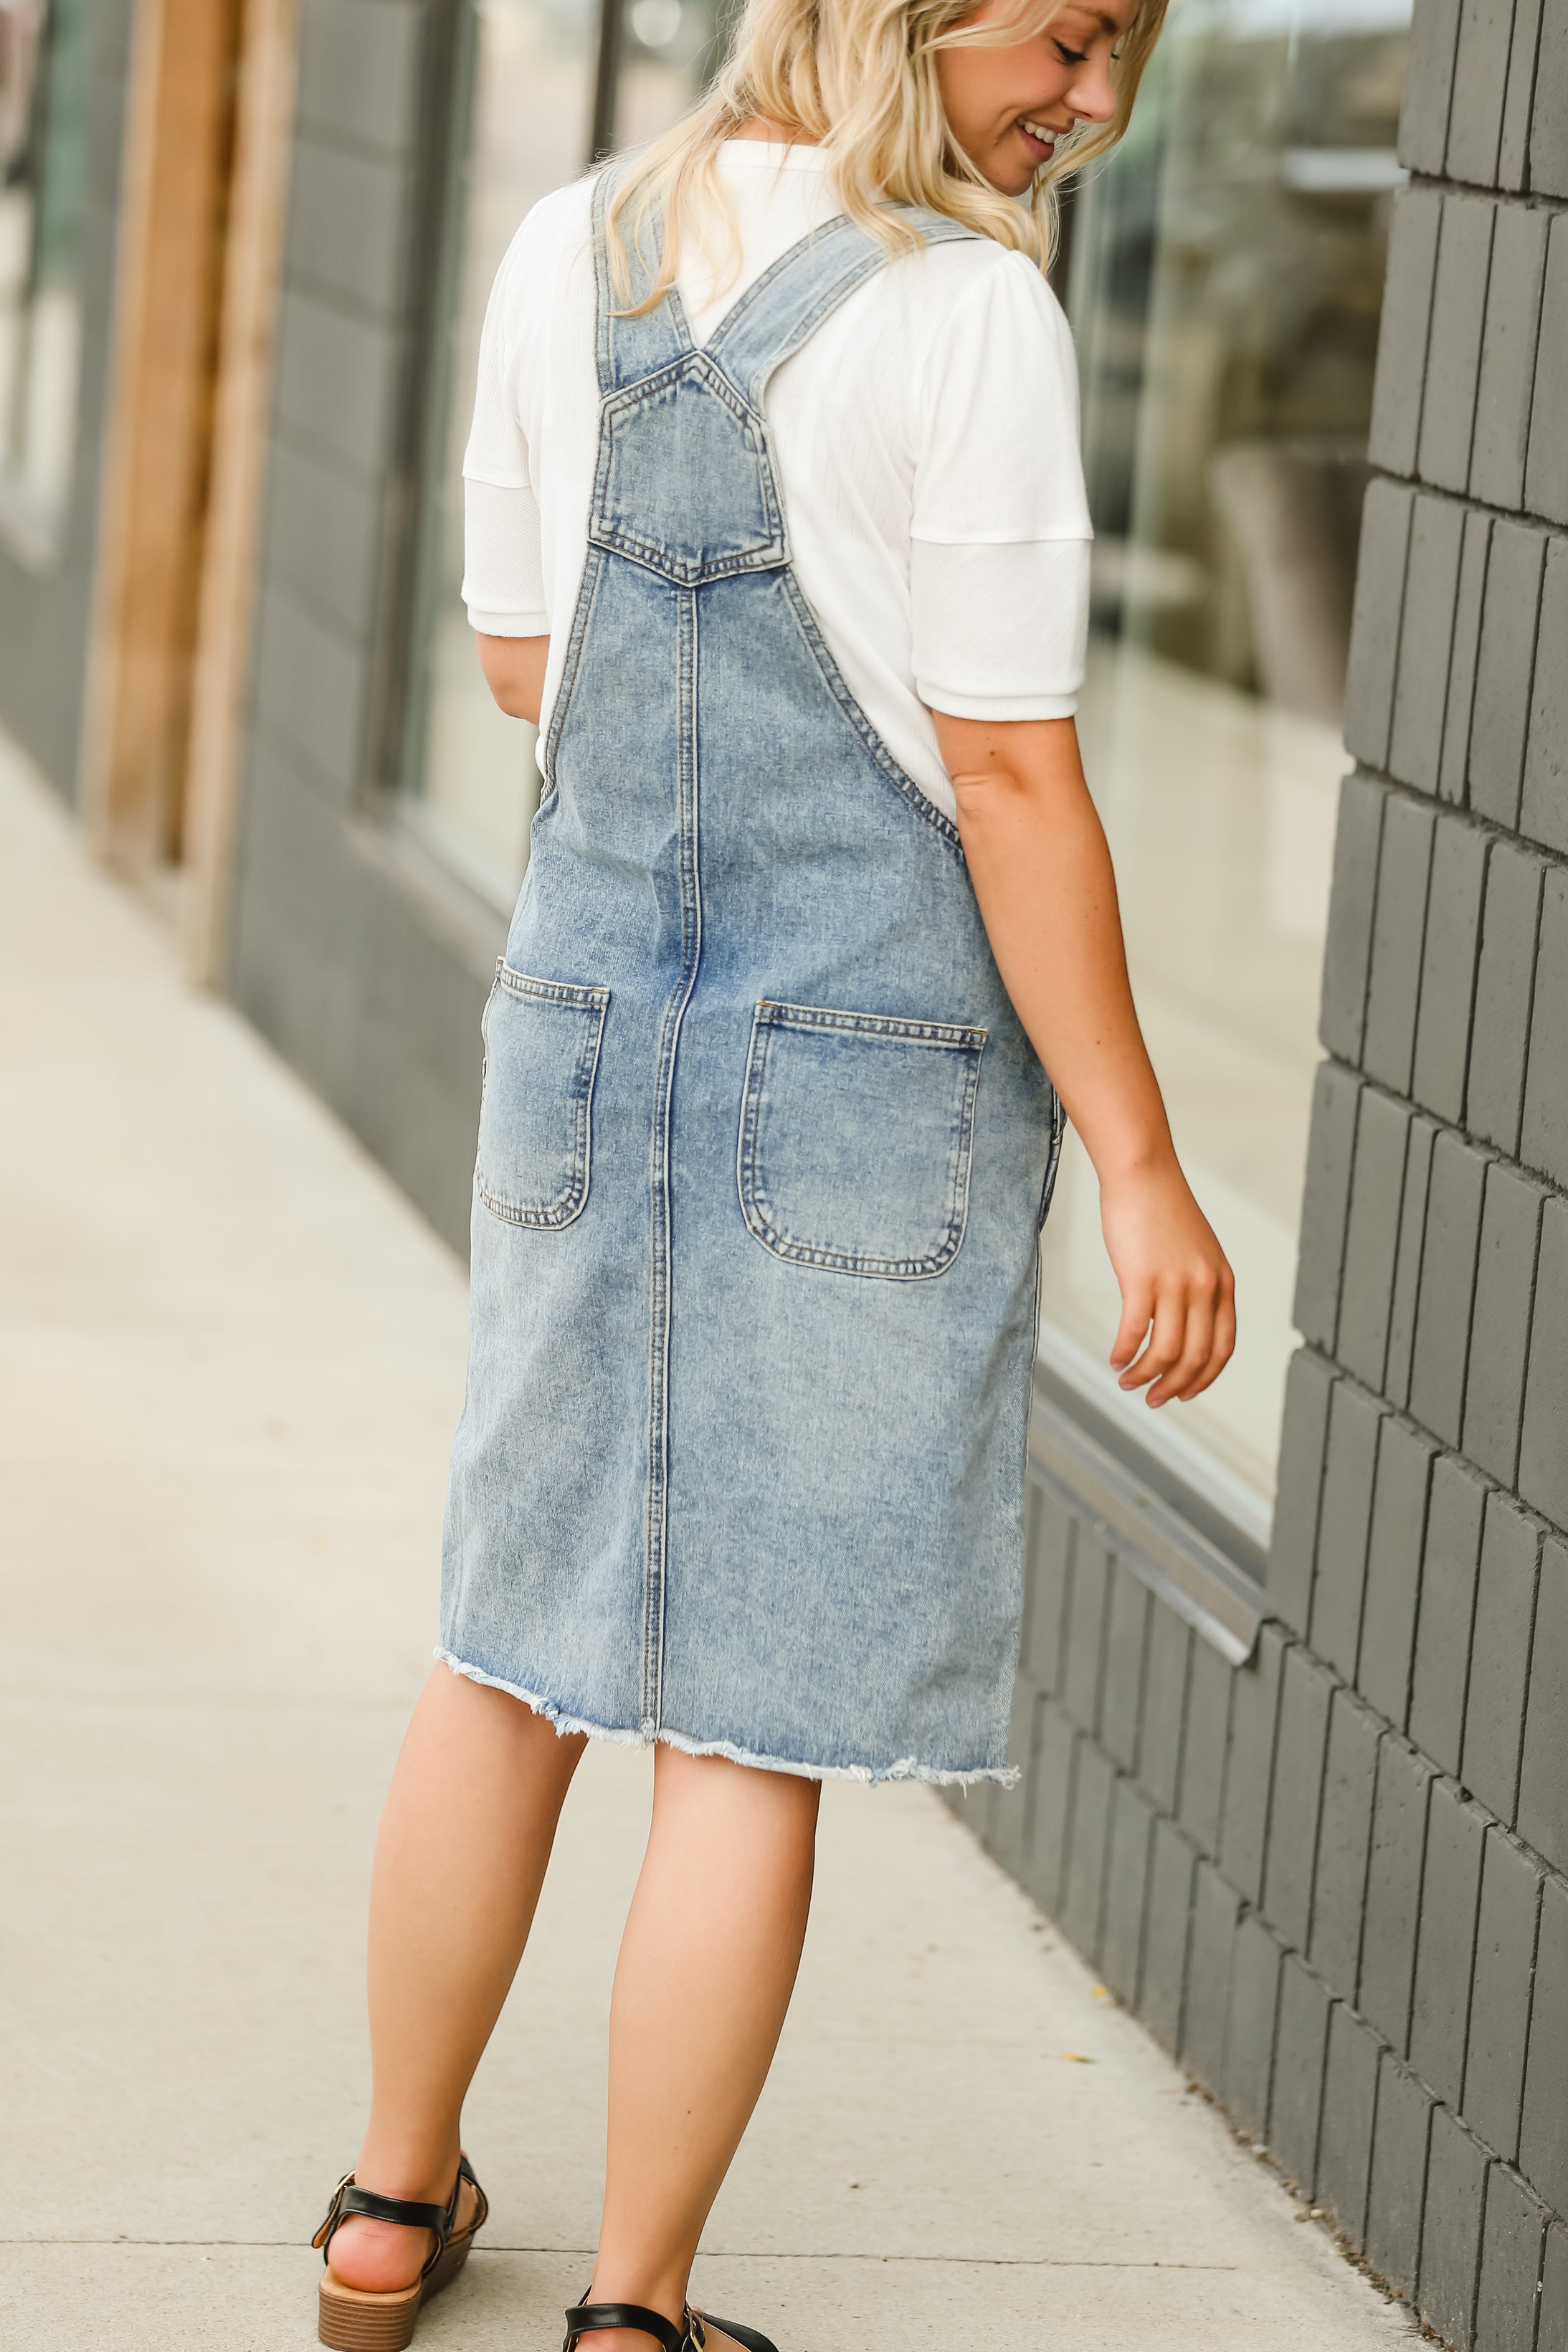 Blue Denim Overall Dress Outfits (16 ideas & outfits) | Lookastic